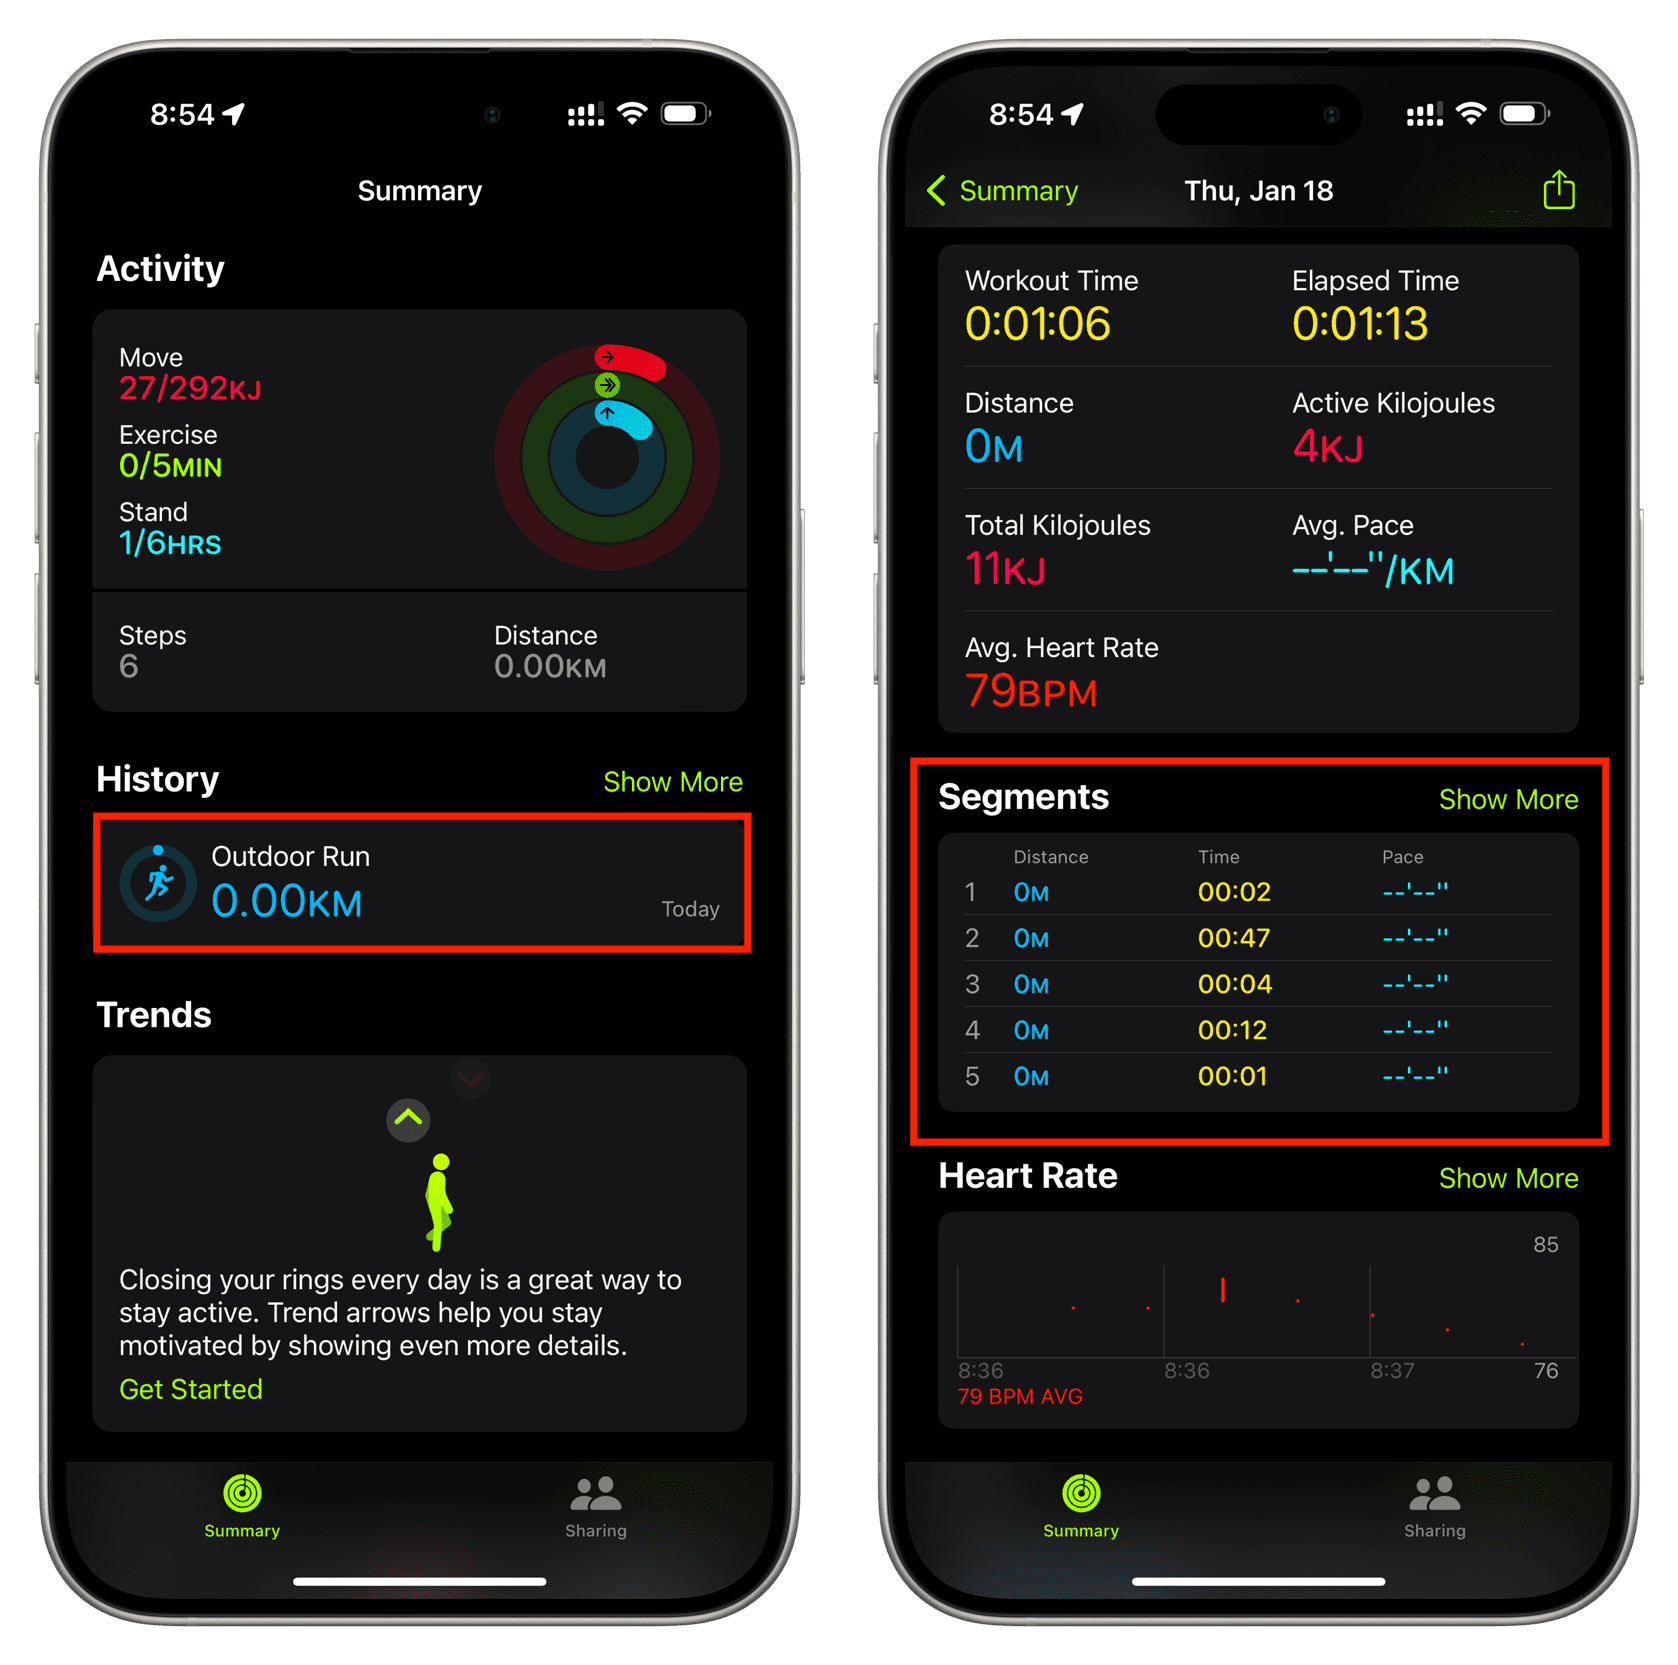 View Segments in iPhone Fitness app